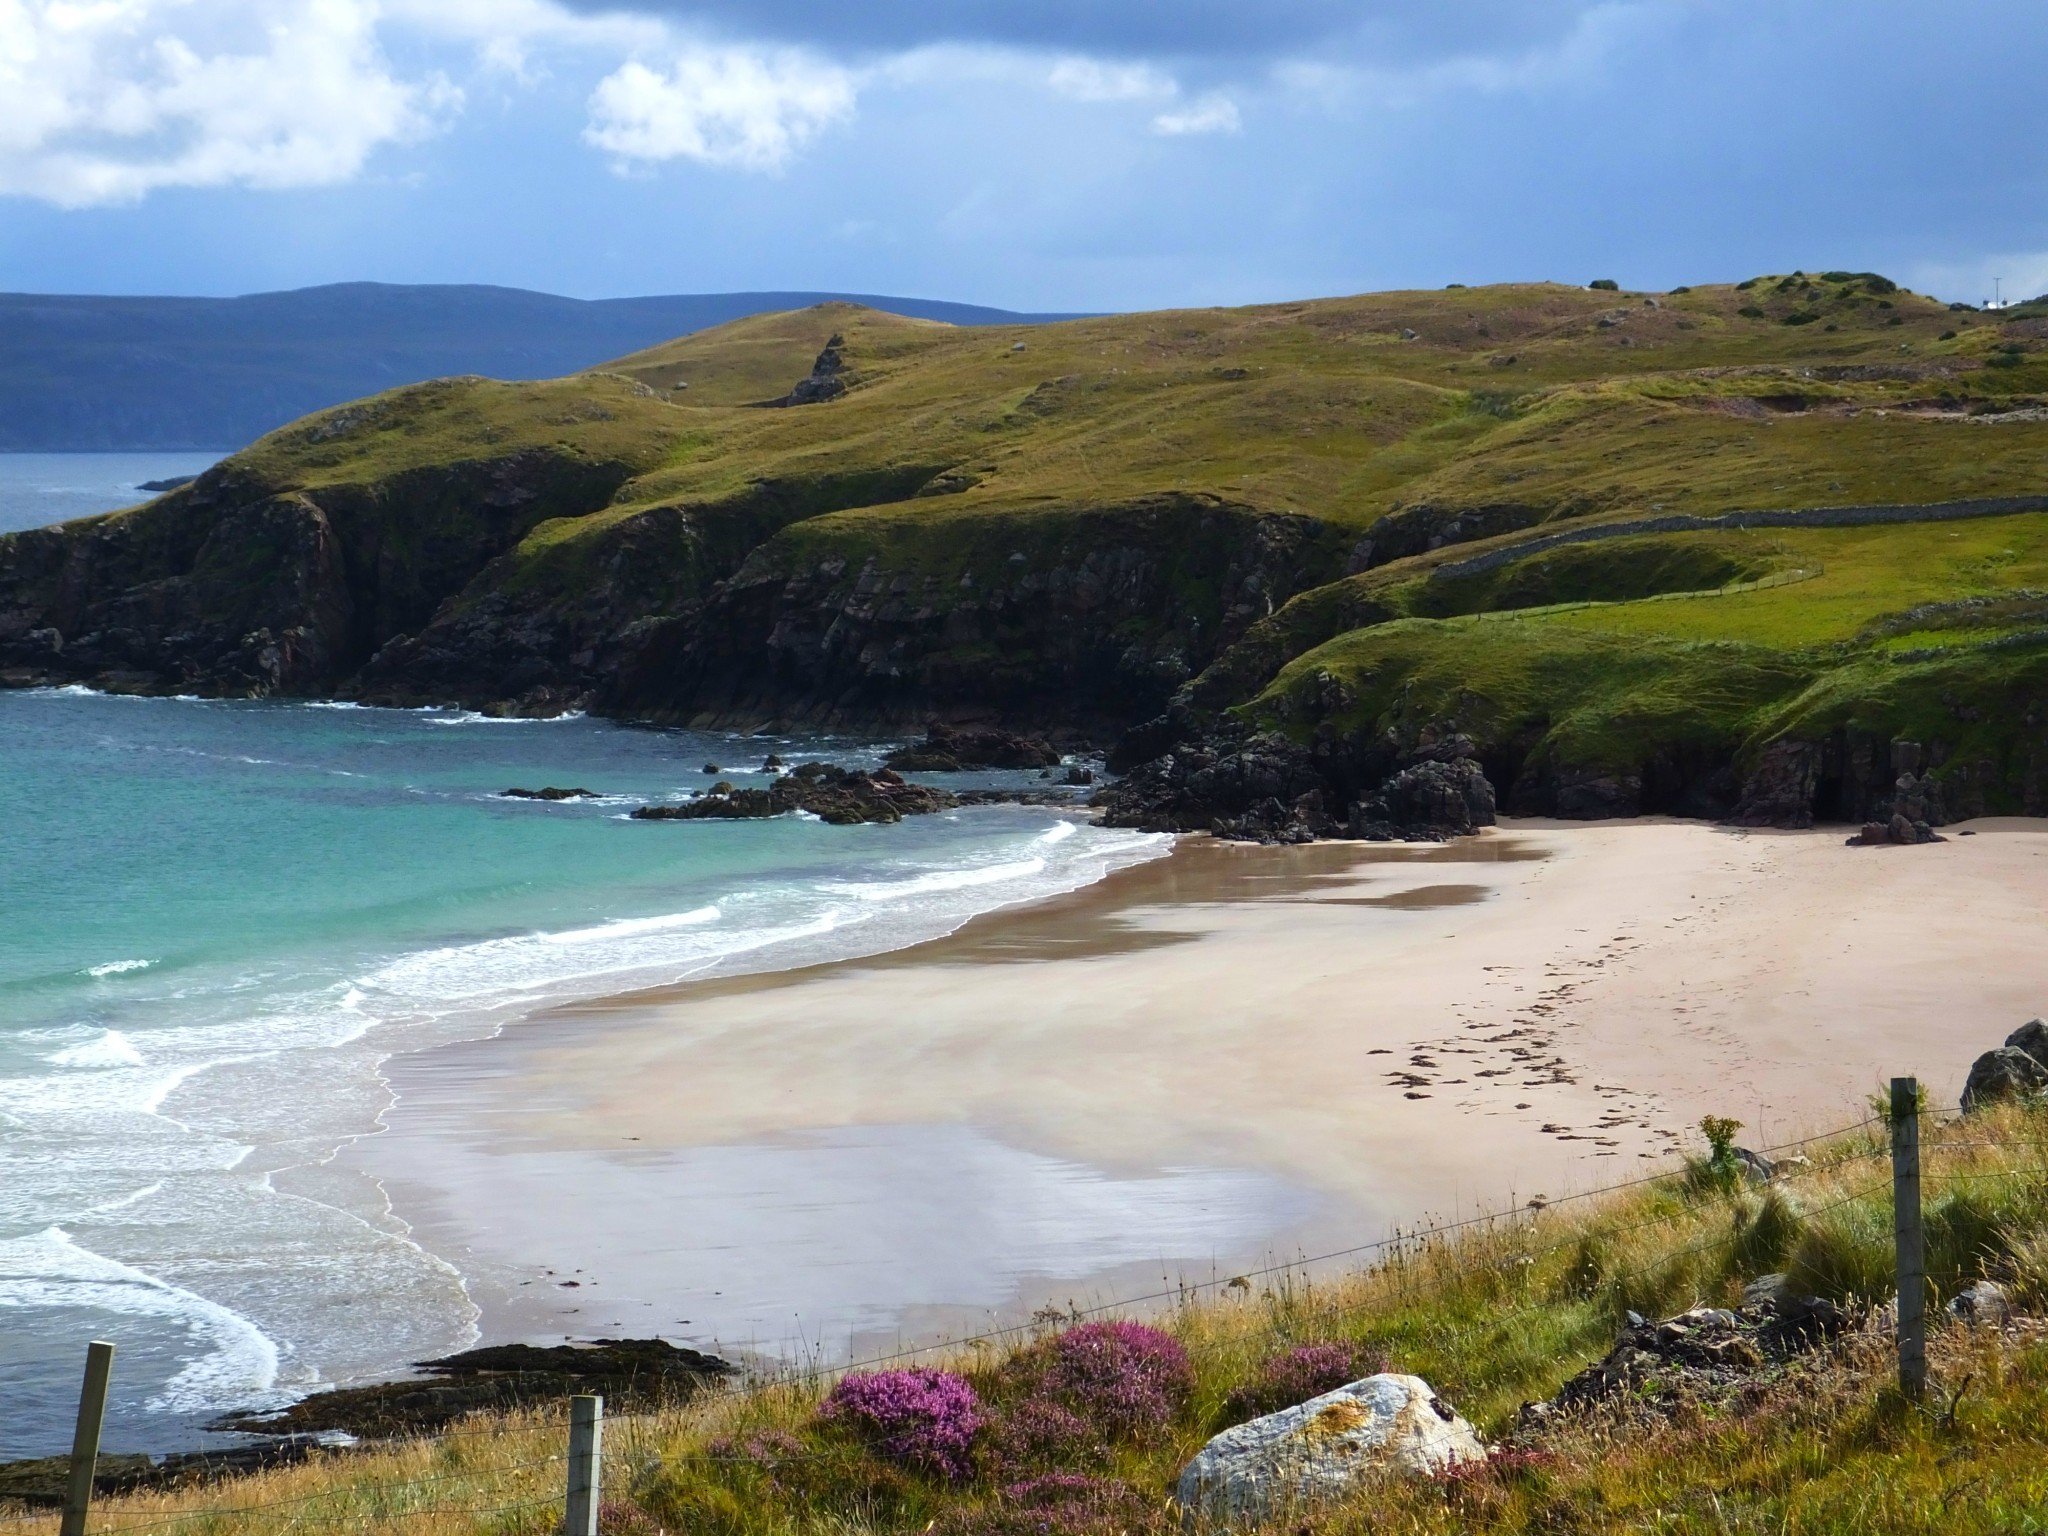 Durness Beach - Golden sands lie in front of a gentle green headland and white waves wash up on the beach.